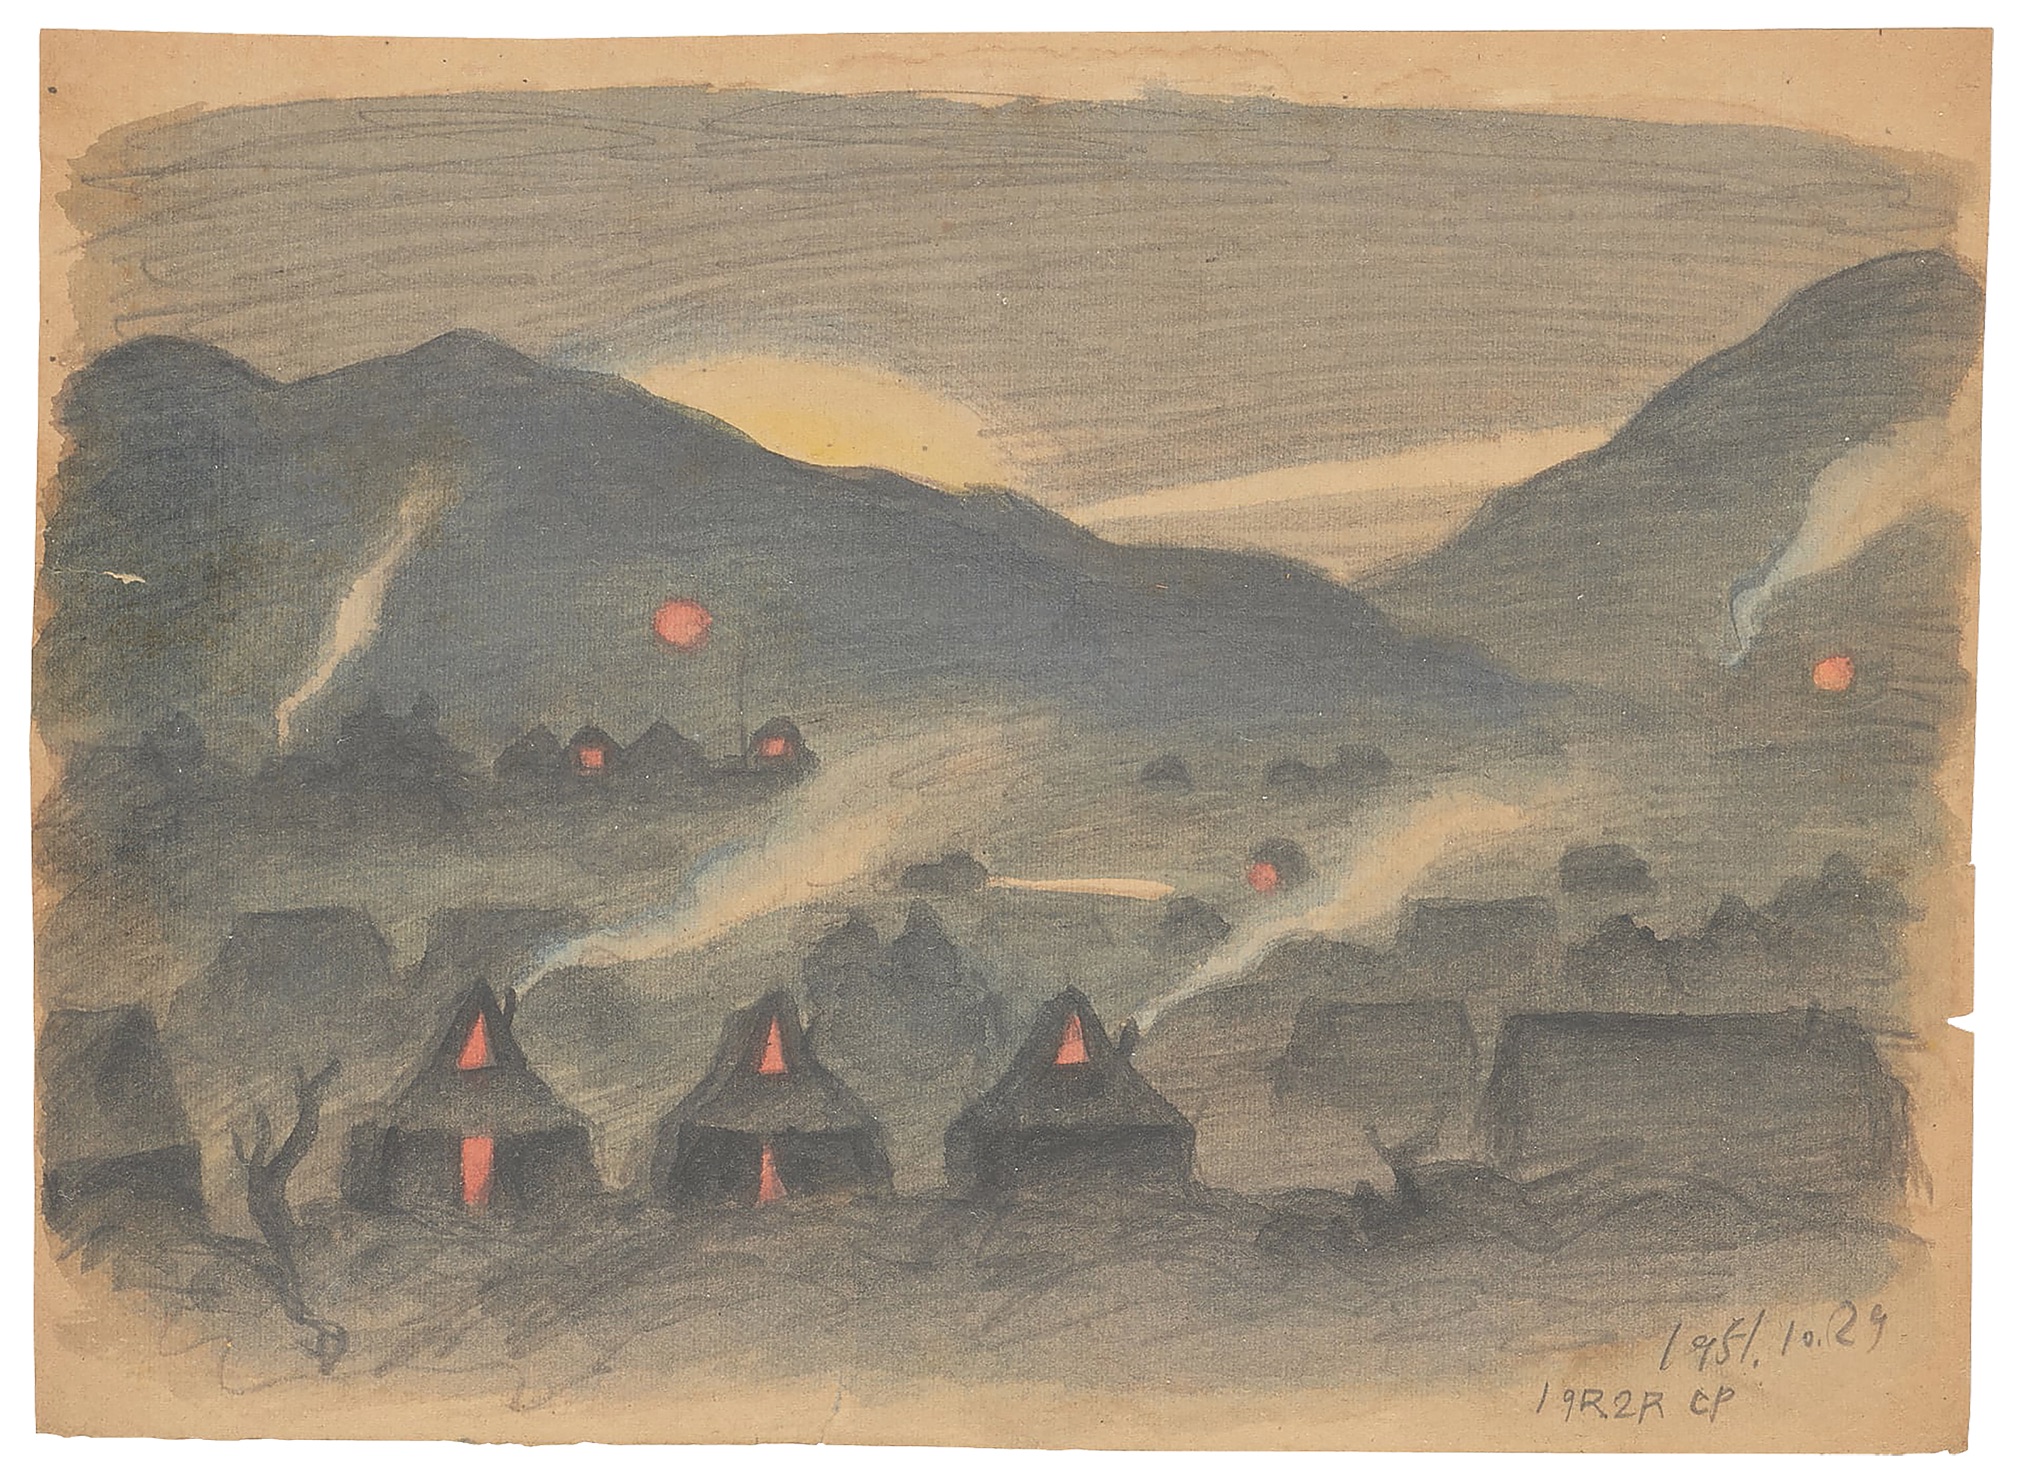 As an official war artist for the South Korean Ministry of Defense, Kim spent time near the front line, where he made this watercolor, Observation Post of 1st Battalion 19th Regiment. (National Museum of Modern and Contemporary Art, Korea)